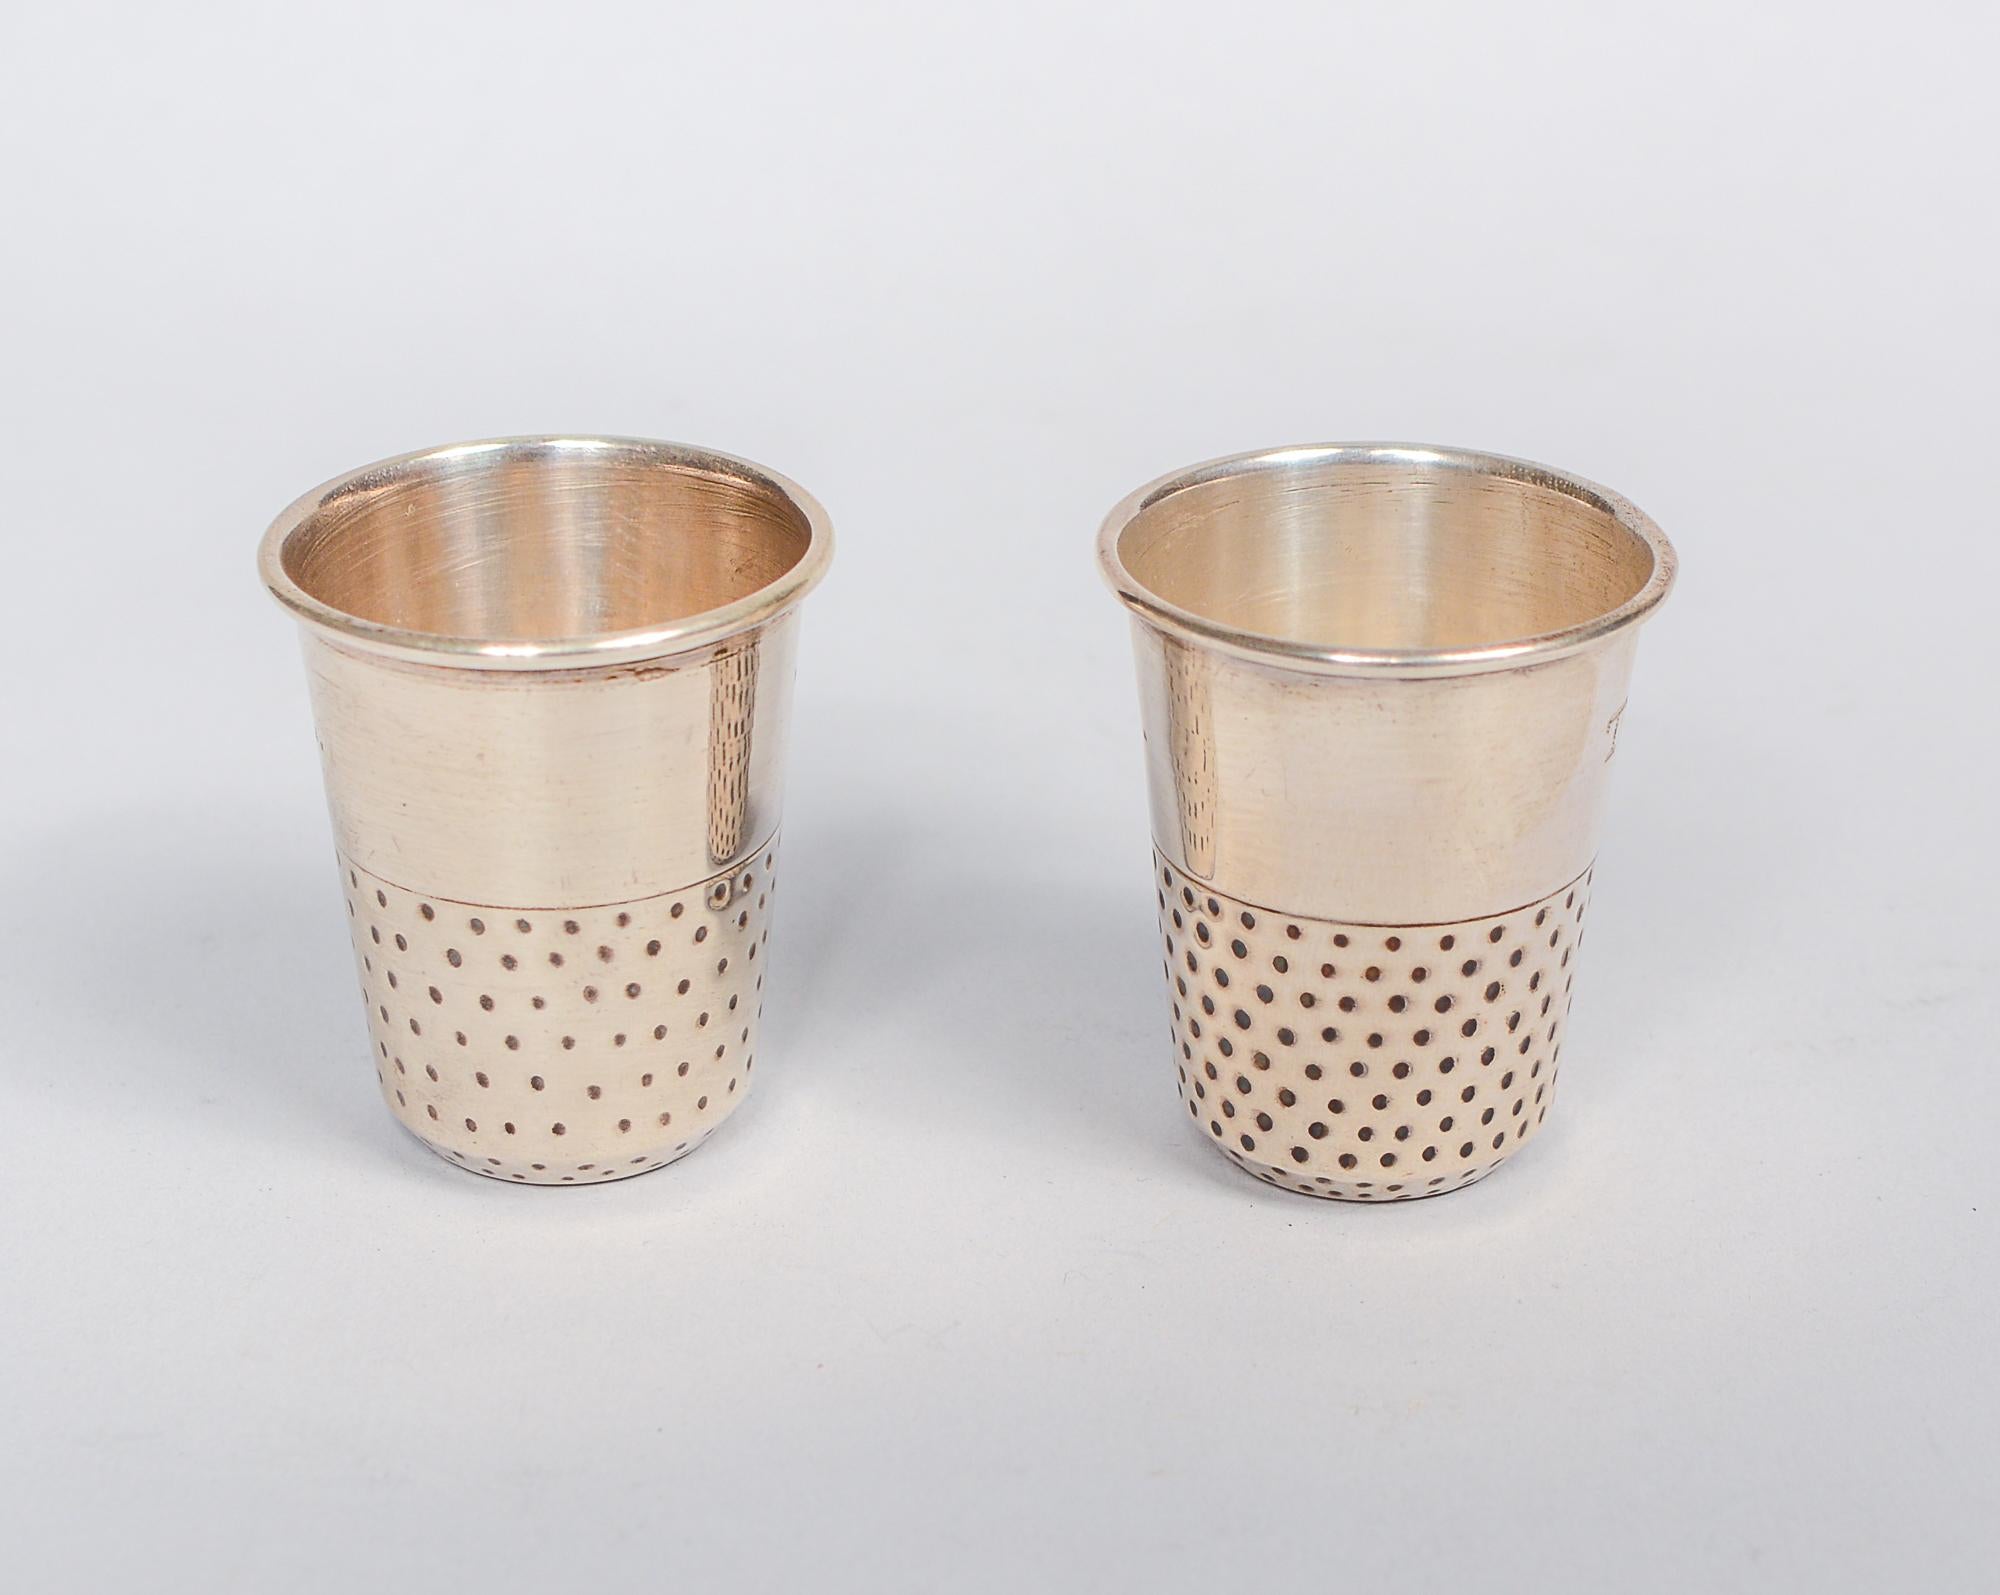 Pair of sterling silver shots or jiggers by Rancho Alegre, Taxco. These are in the form of a thimble. Each is engraved 